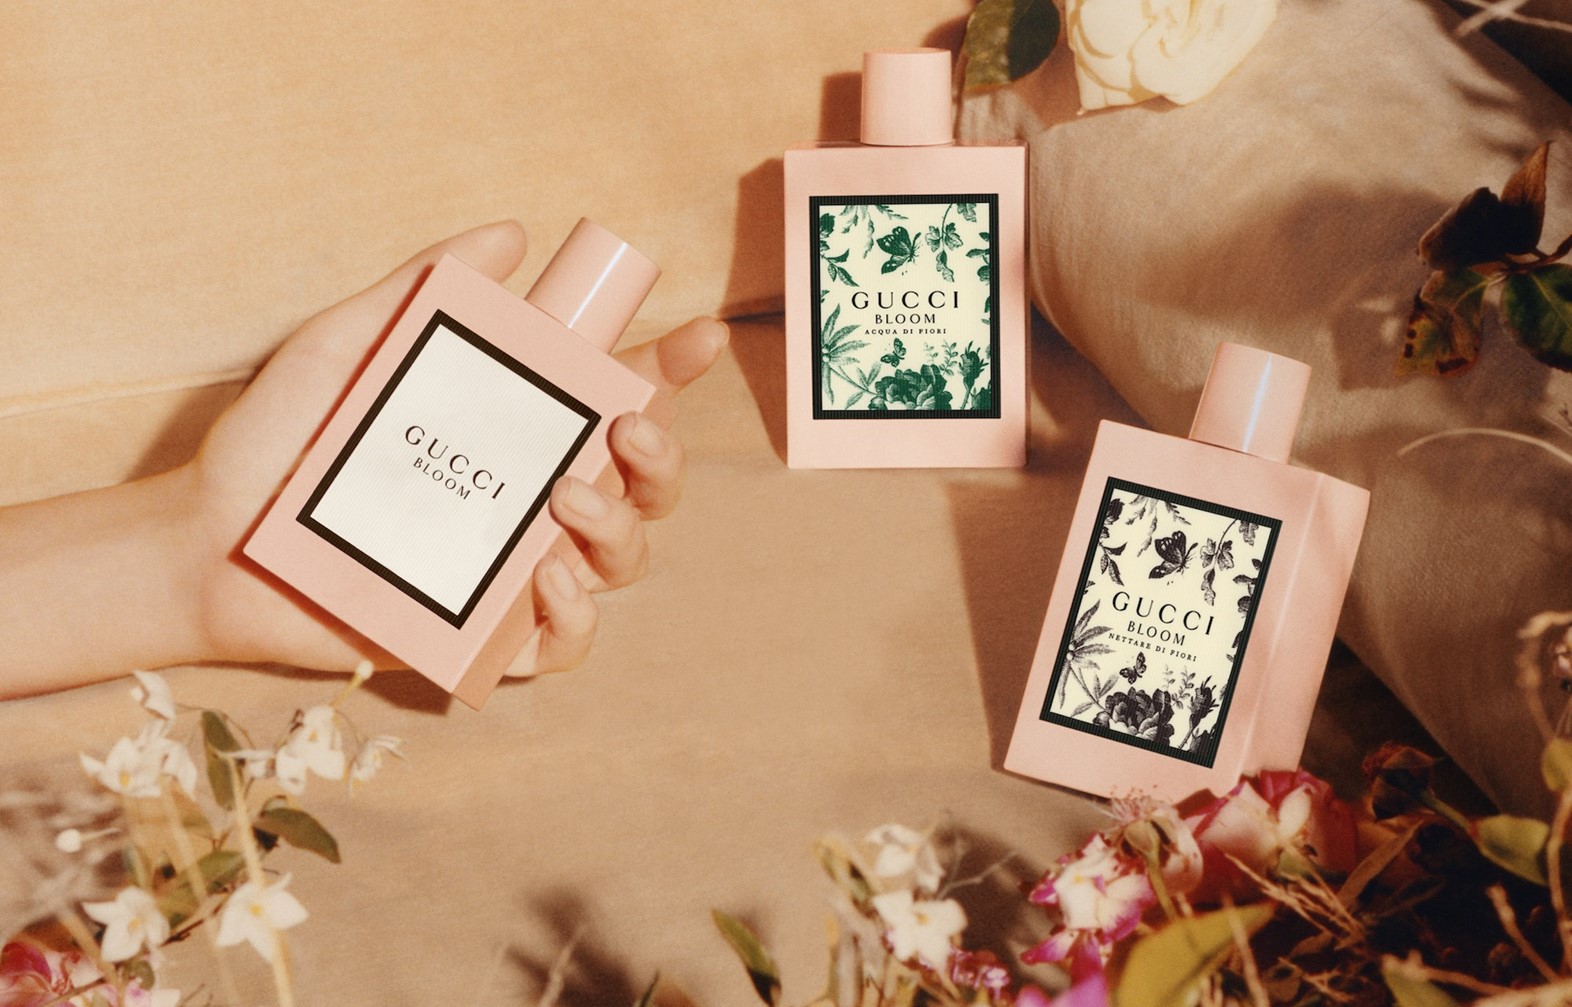 Fragrance Review: Gucci – Bloom (All Flankers) – A Tea-Scented Library